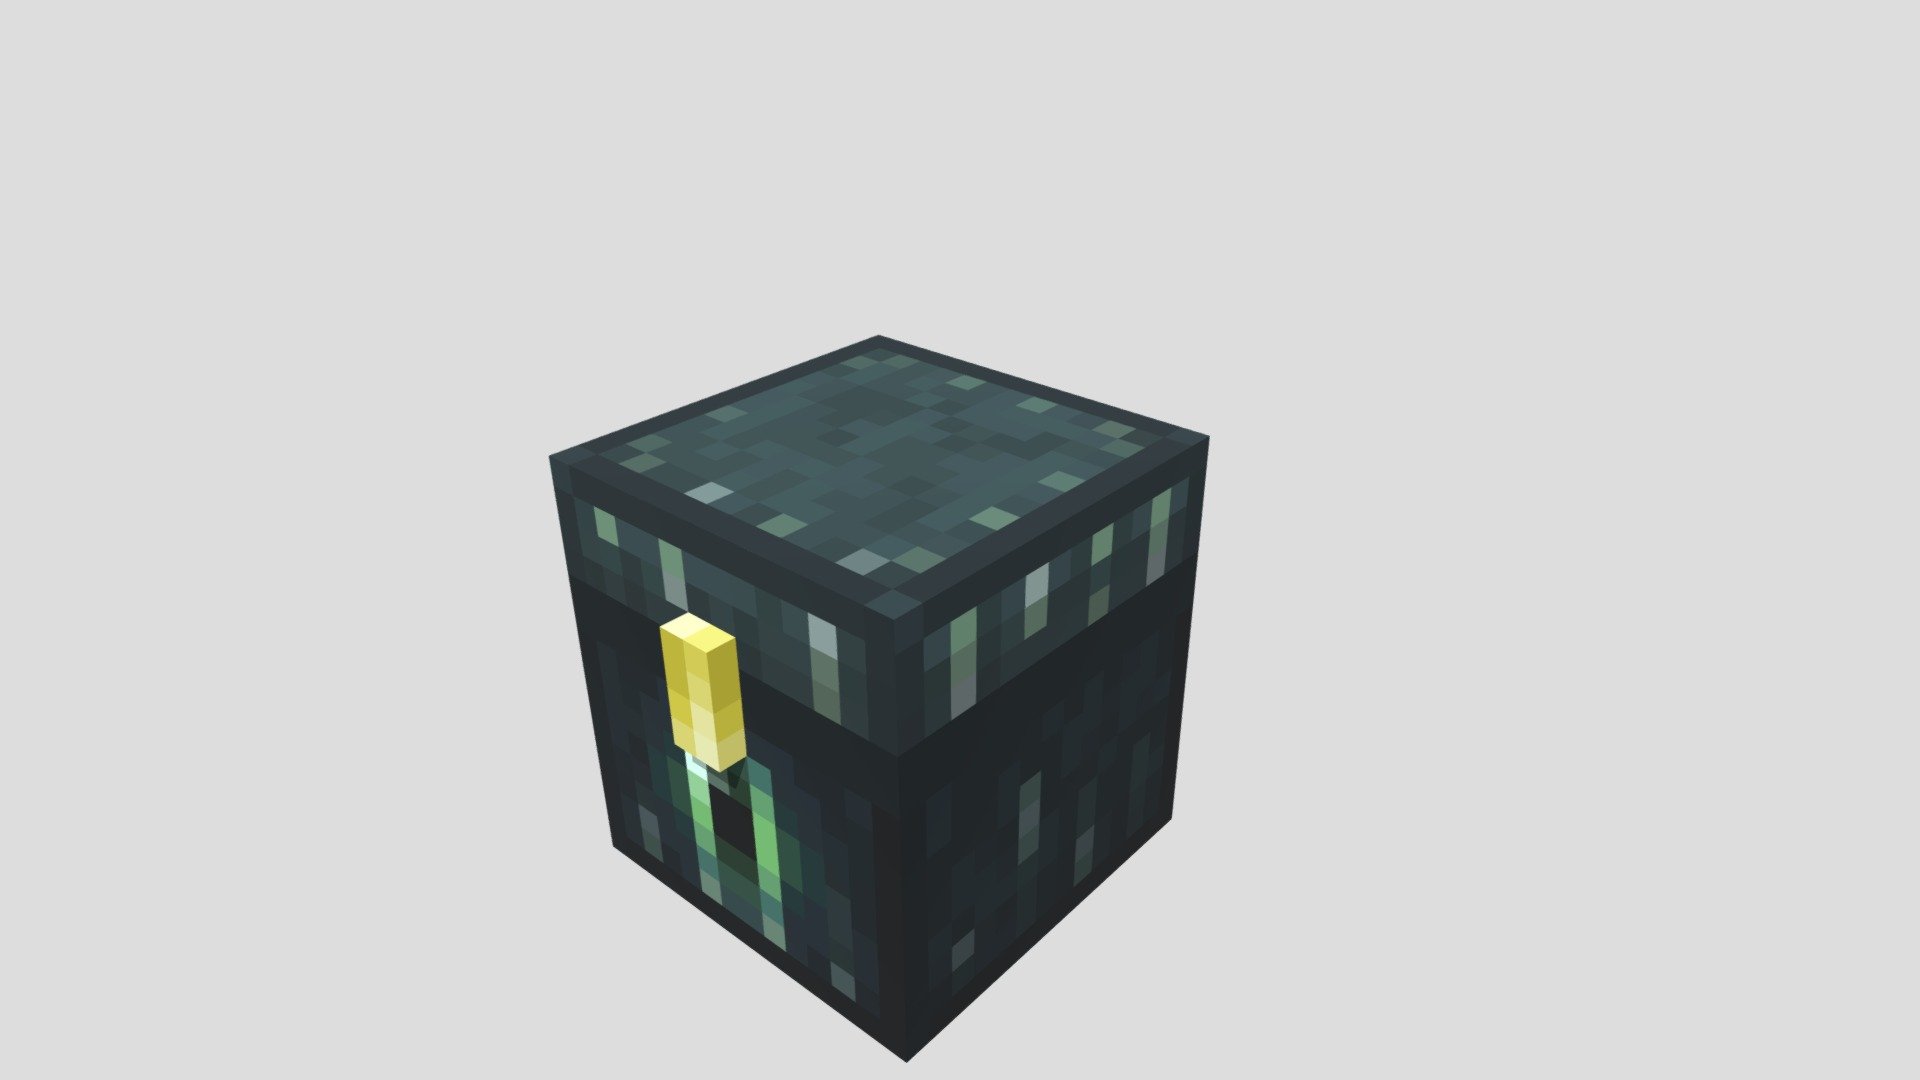 Ancient Chest [Ender Chest] Minecraft Texture Pack